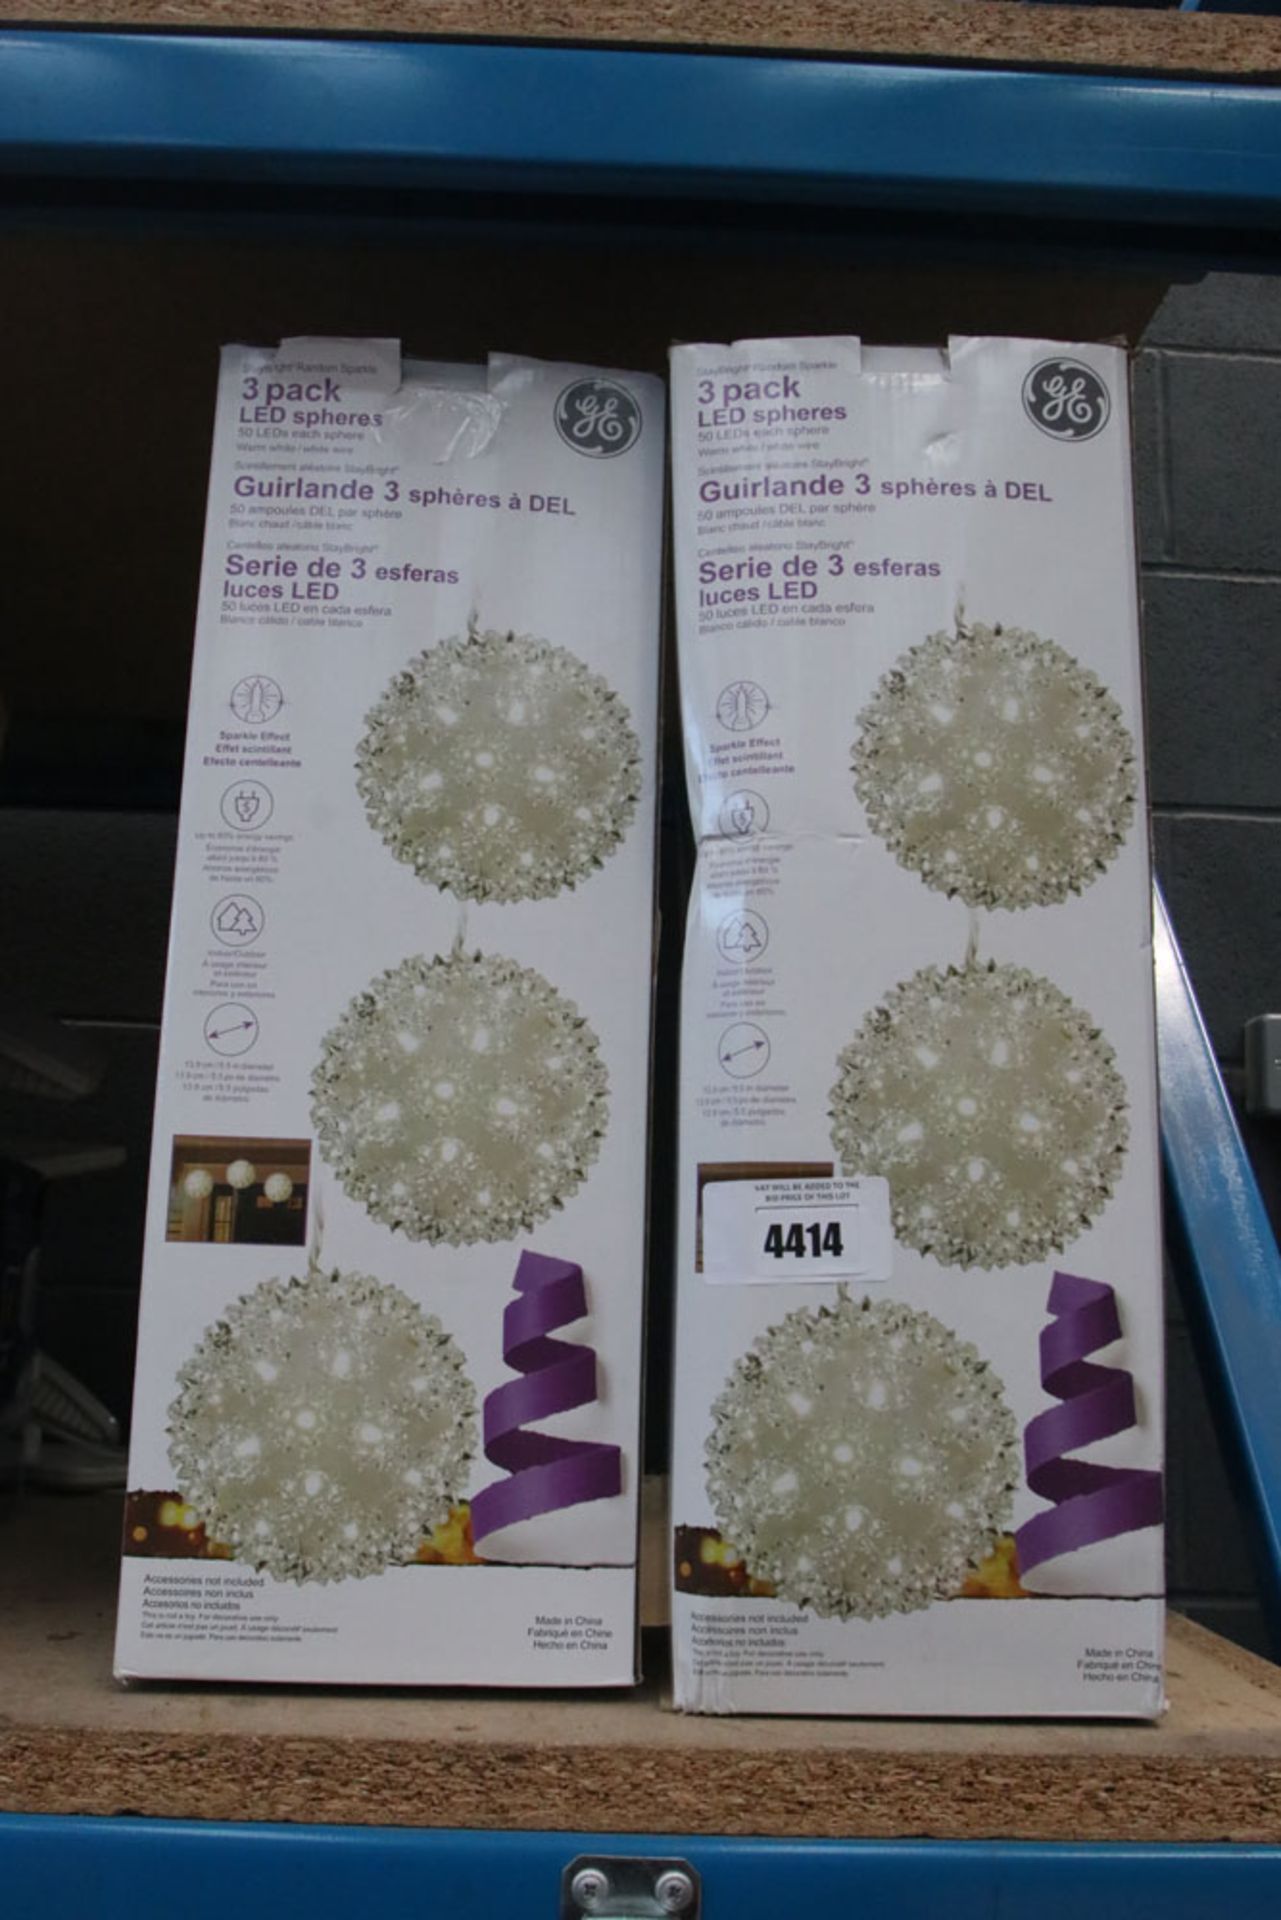 2 boxes of LED spheres